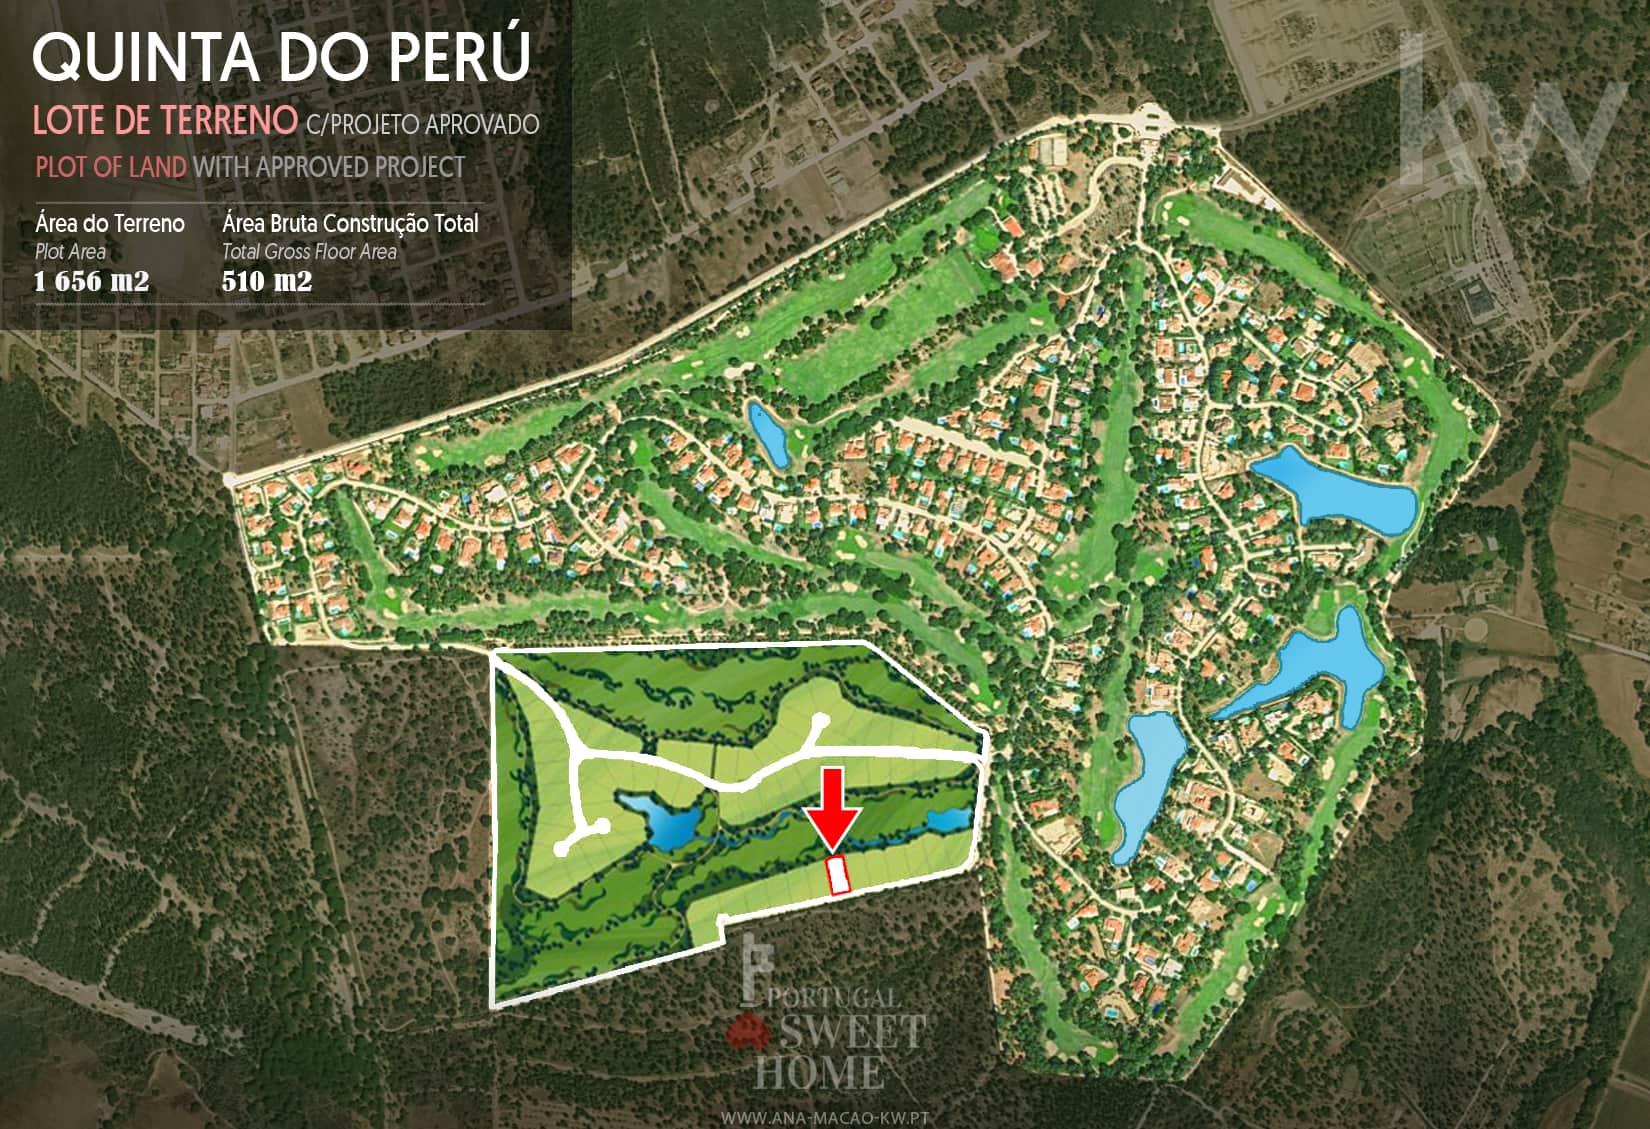 Location of the Plot of Land at Quinta do Peru Golf & Country Club